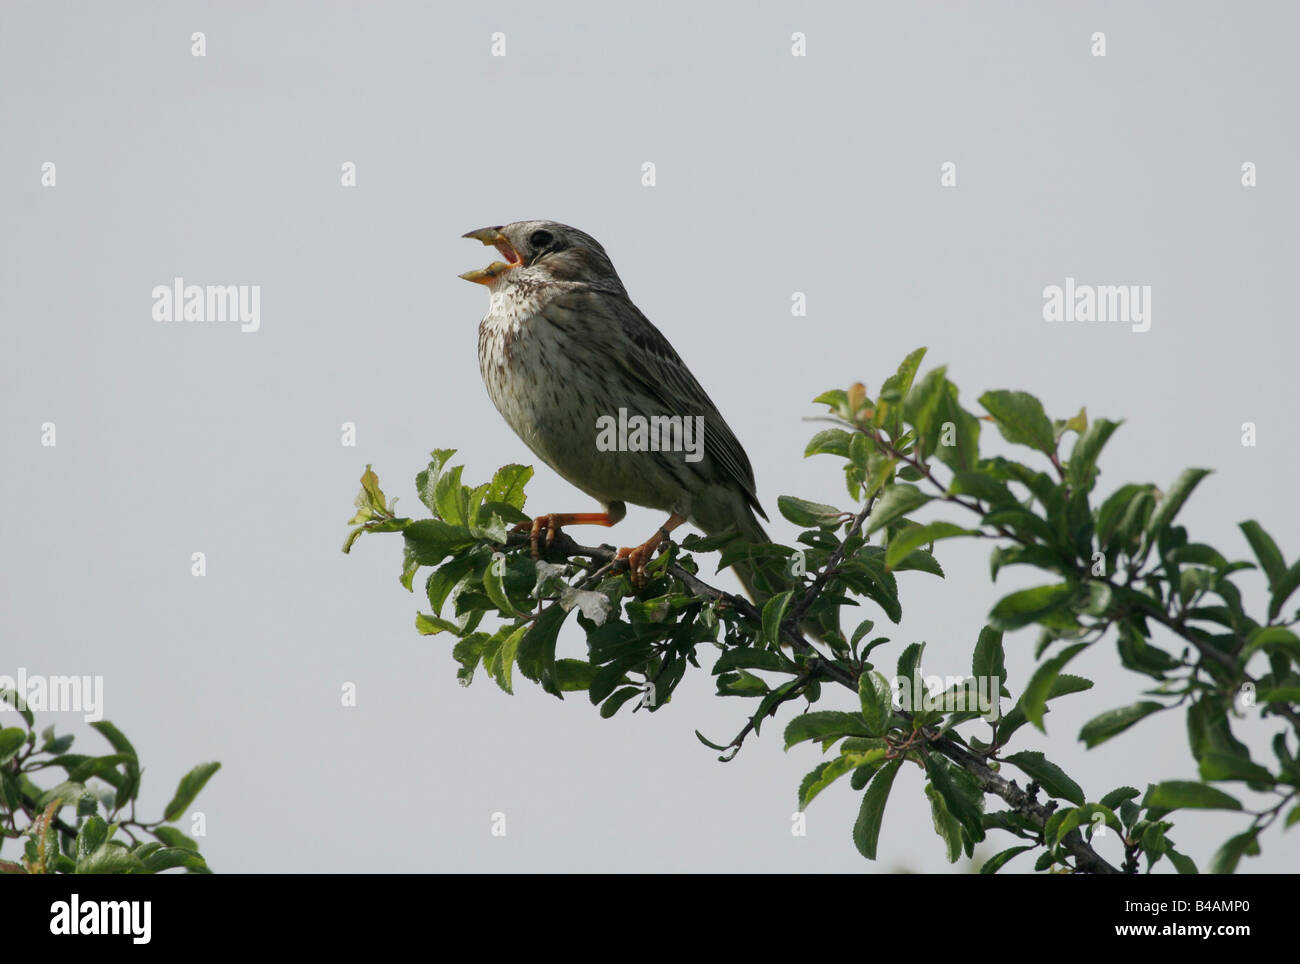 zoology / animals, avian / birds, Corn Bunting, (Emberiza calandra), sitting on branch, Neusiedler See, Austria, distribution: Northern and Western Africa, Europe, Eastern to Middle East, Additional-Rights-Clearance-Info-Not-Available Stock Photo